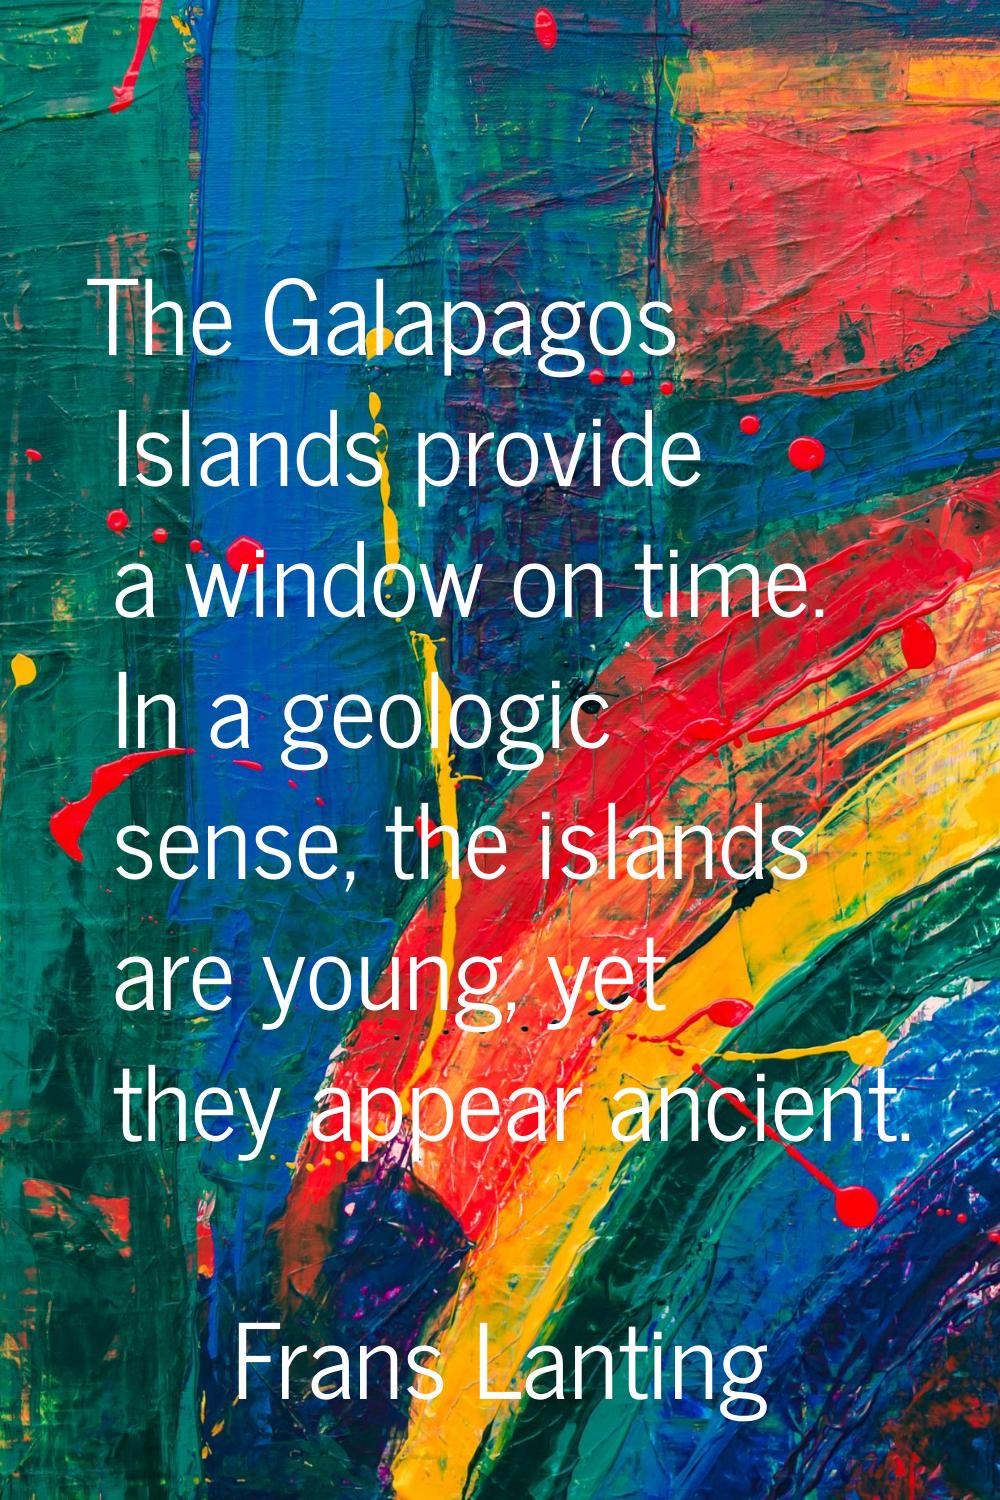 The Galapagos Islands provide a window on time. In a geologic sense, the islands are young, yet the